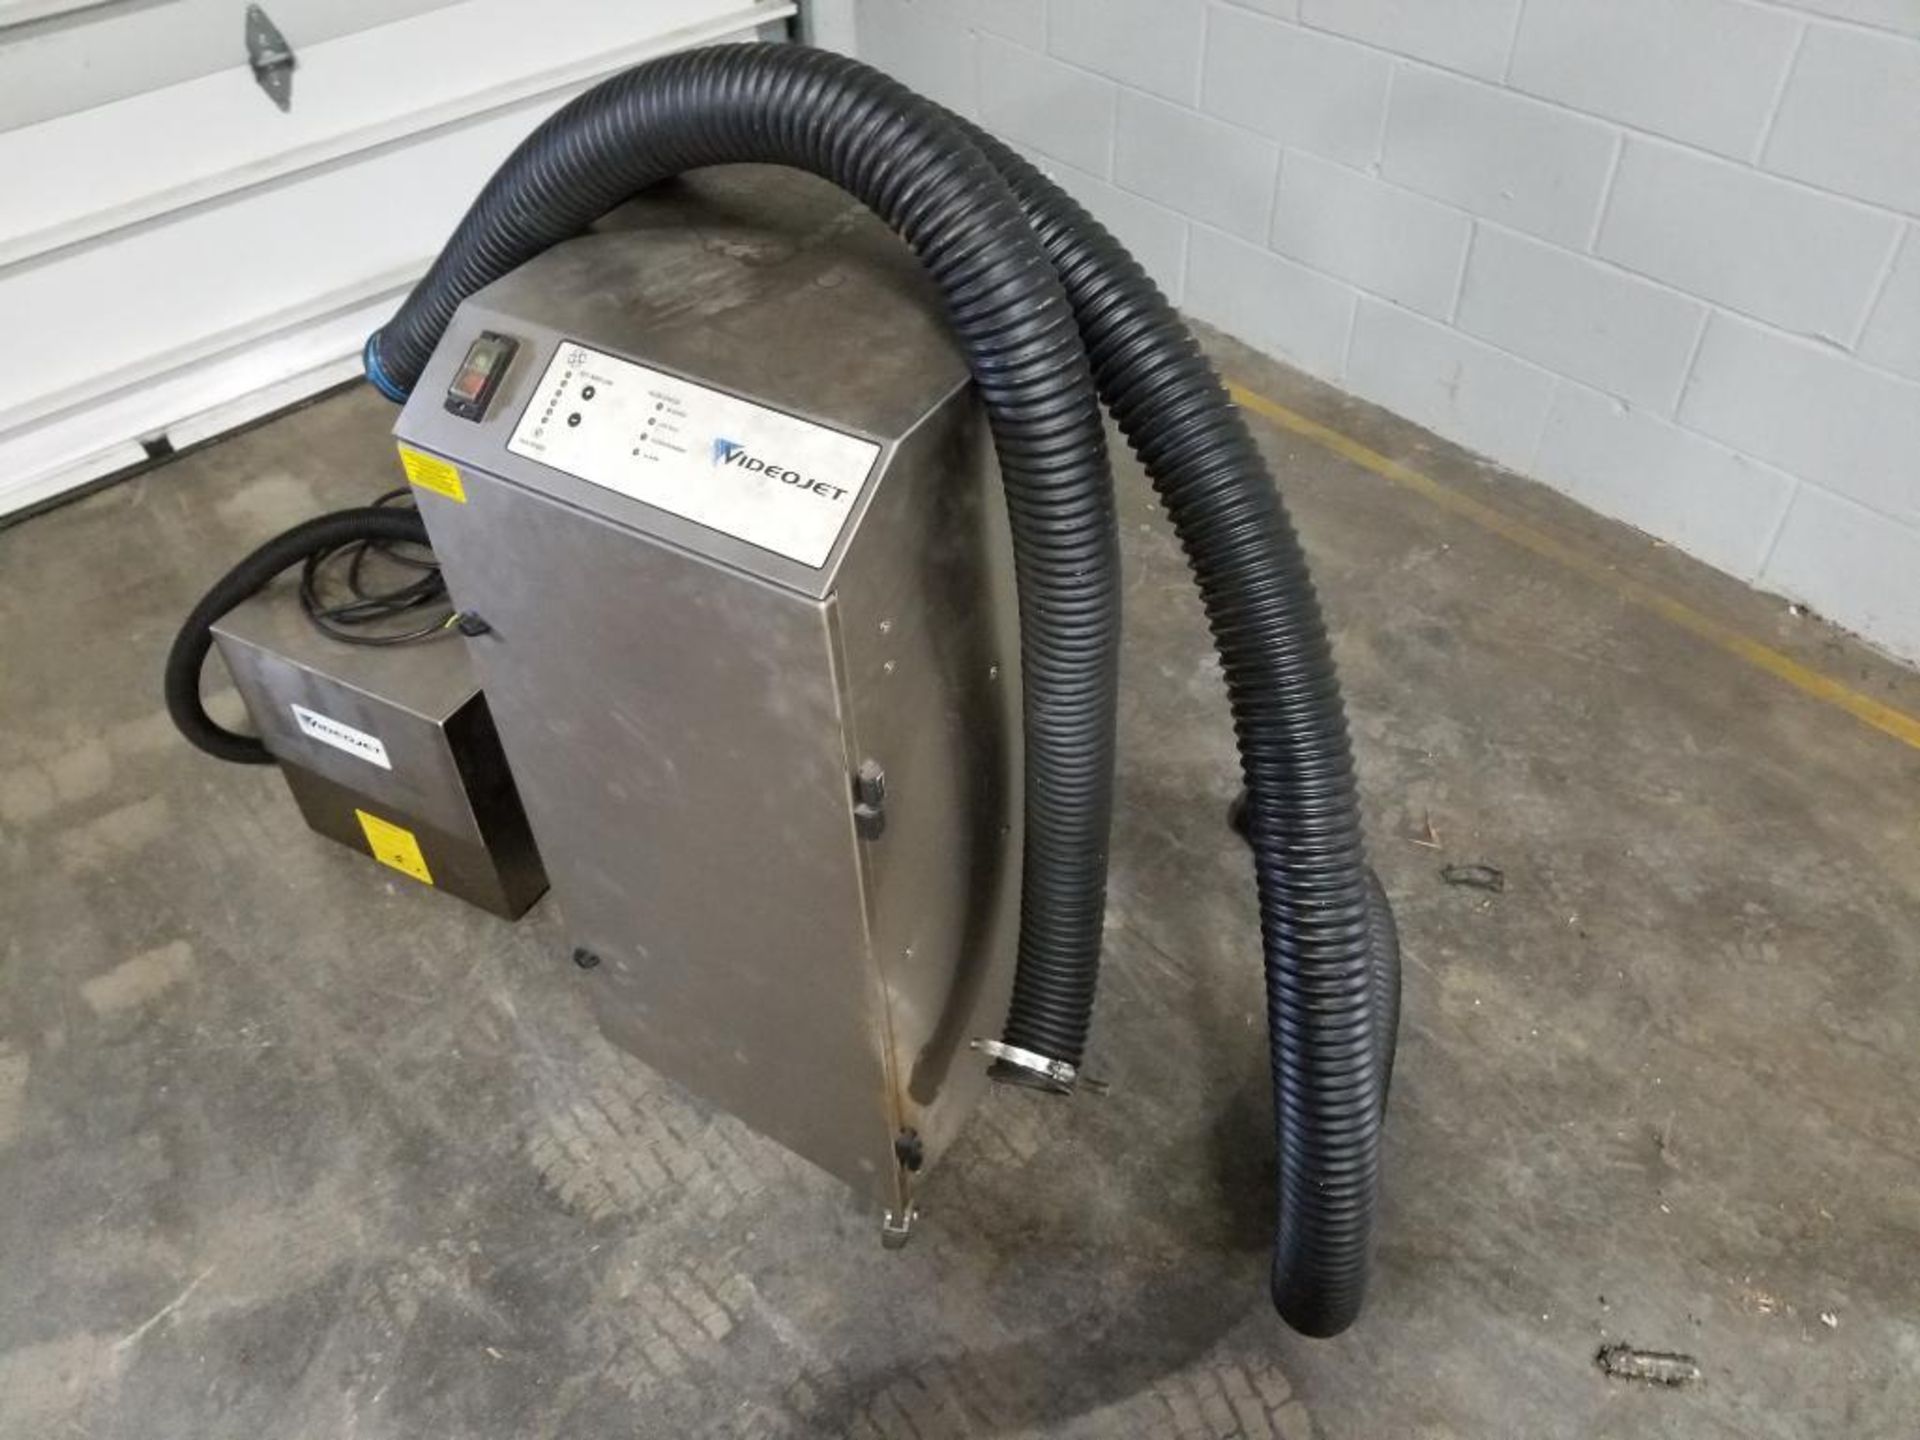 Videojet laser marking system. Unit does include dust collector and blower not pictured. - Image 17 of 21